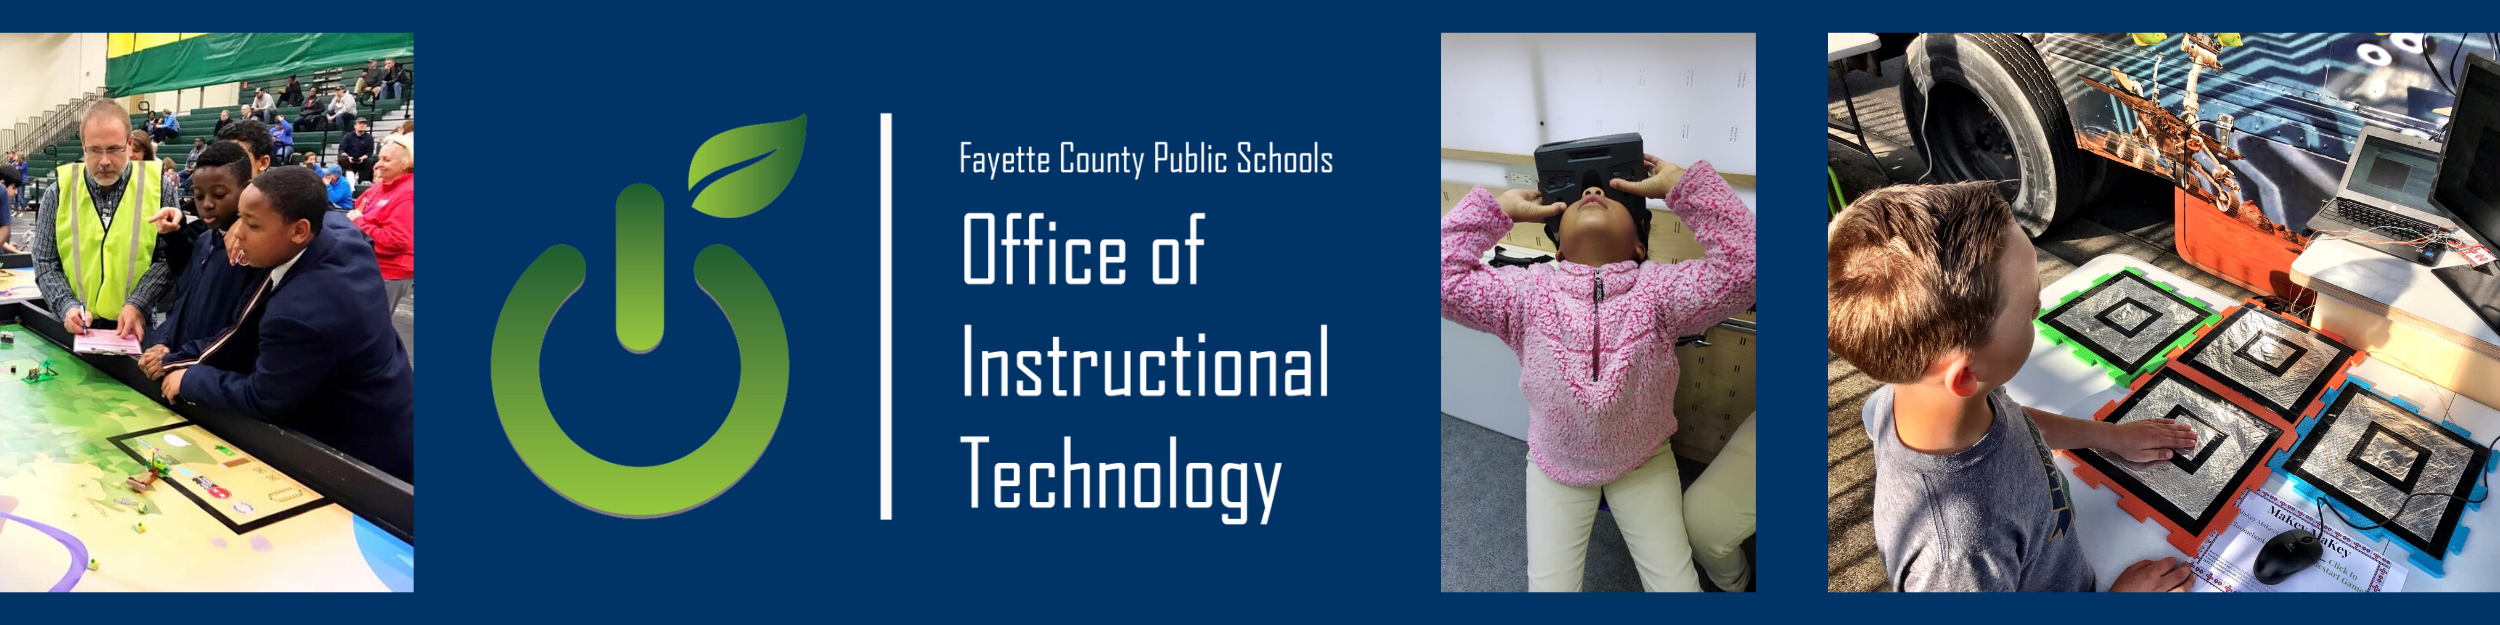 FCPS Office of Instructional Technology